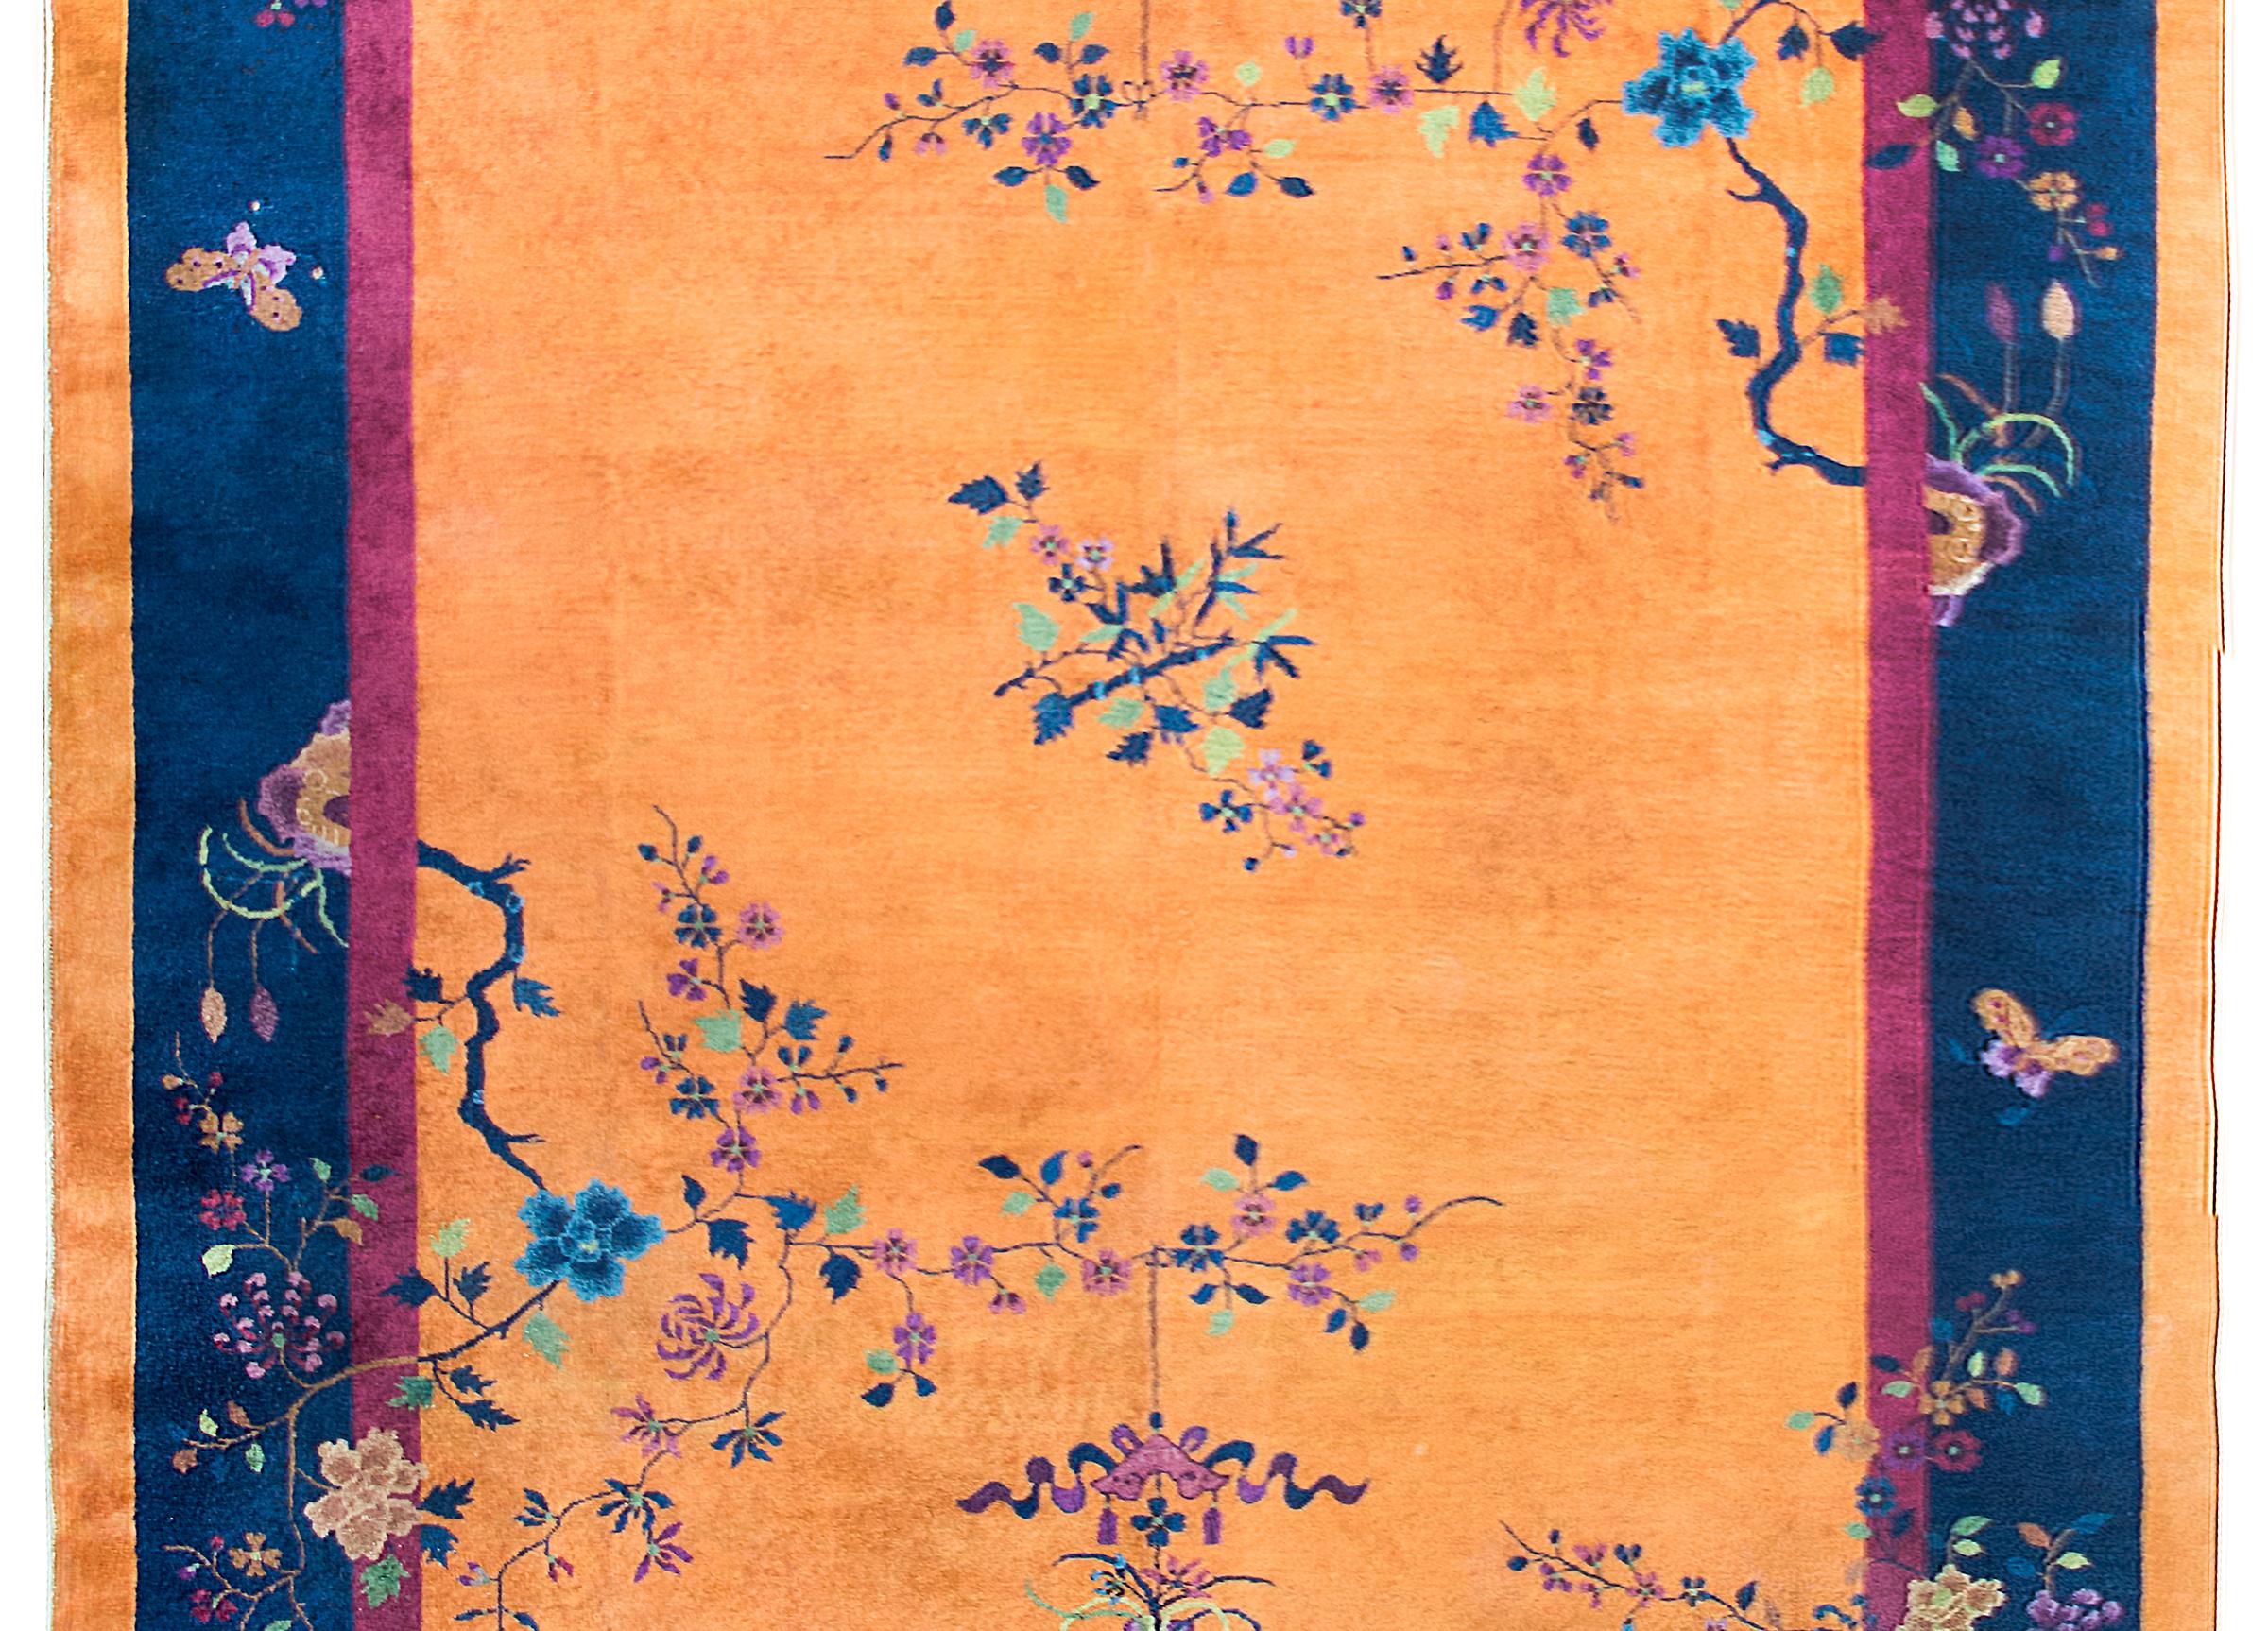 A fantastic early 20th century Chinese Art Deco rug with a brilliant orange sherbet field surrounded by a thin violet liner strip and a wide indigo outer stripe, and all overlaid with vases potted with multicolored peonies in opposing corners, and